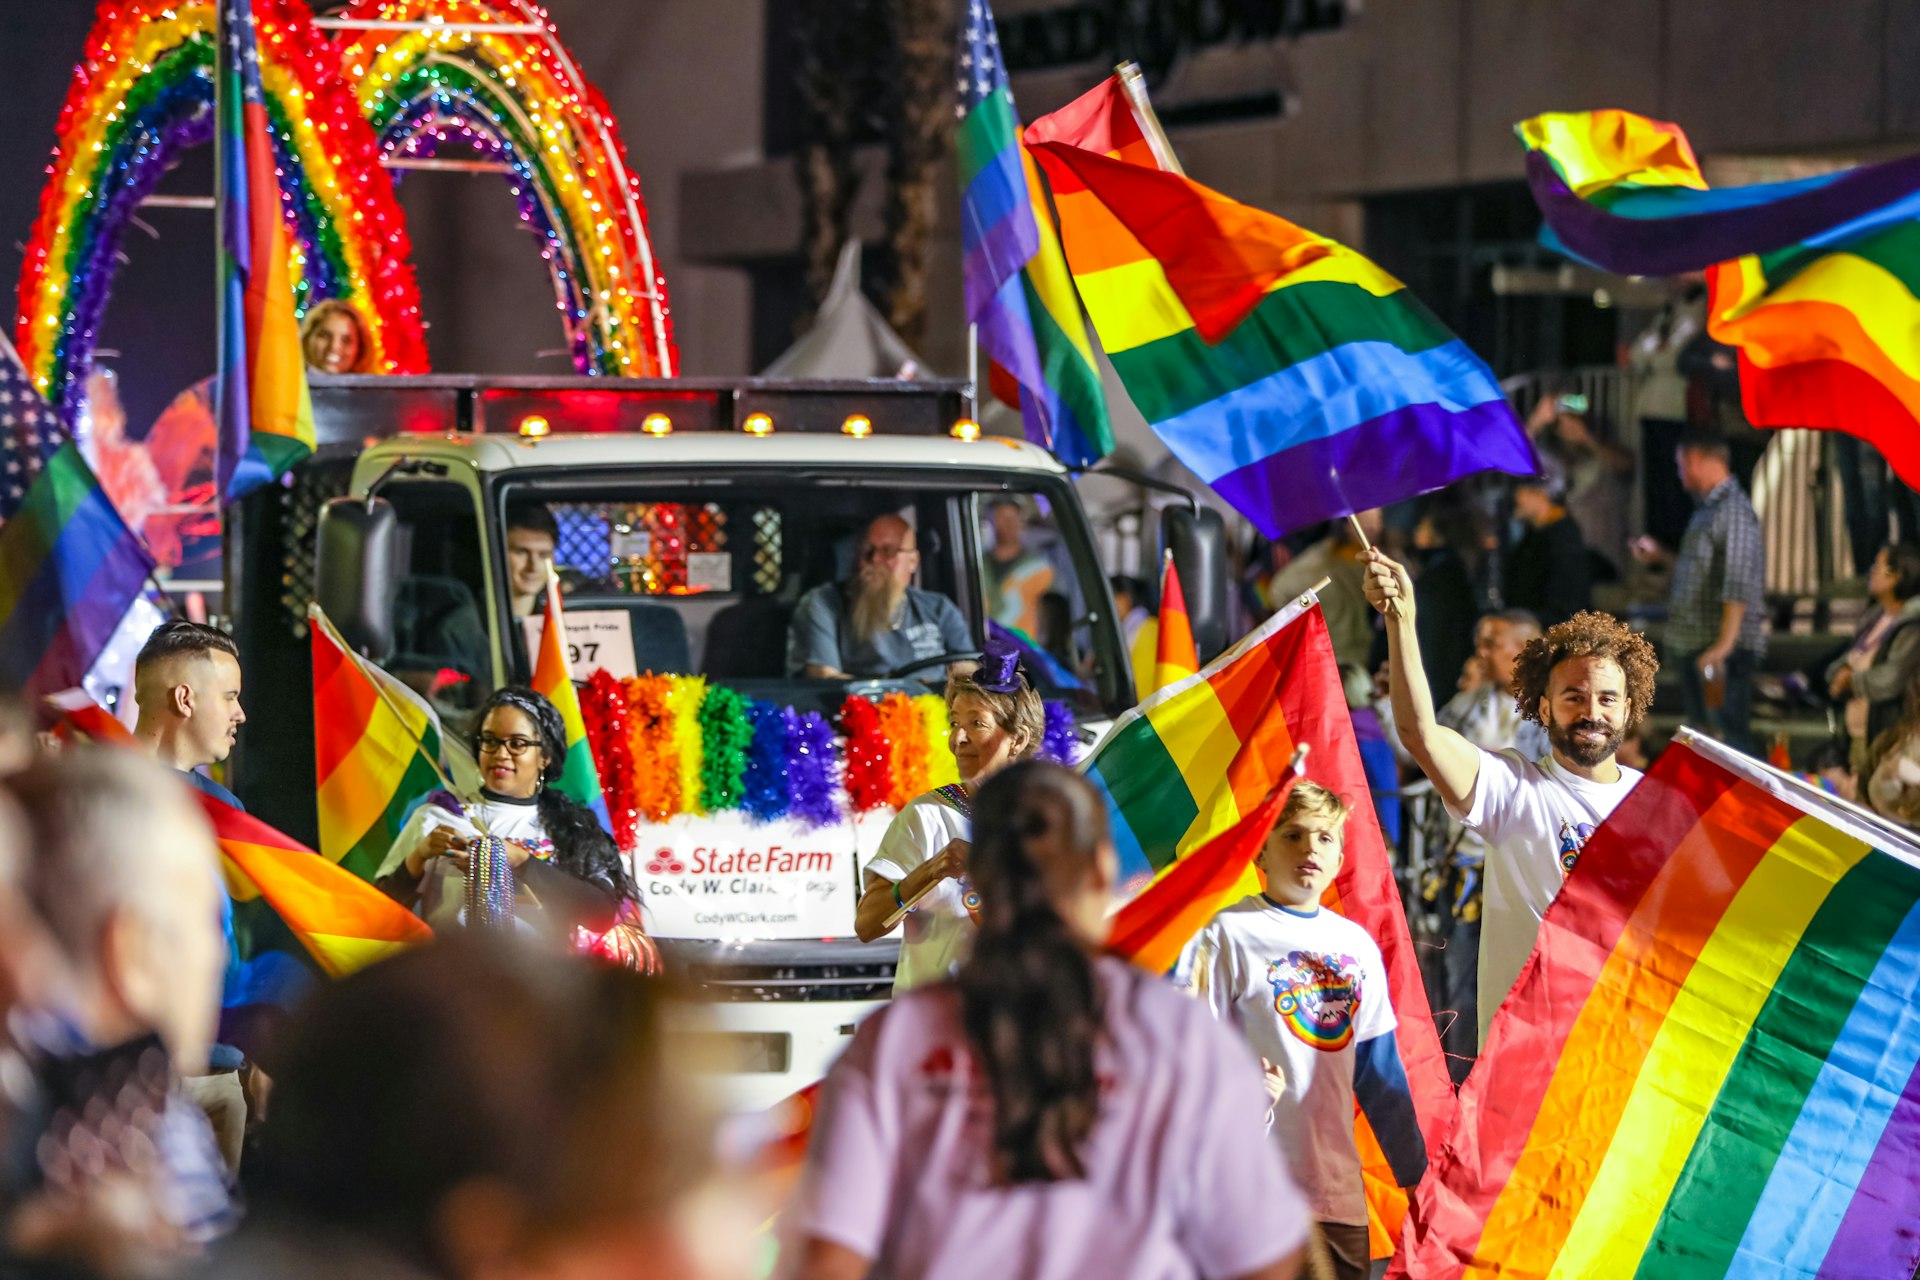 People take part in a parade walking in front of a low-bed truck. There are rainbow flags and motifs flying everywhere